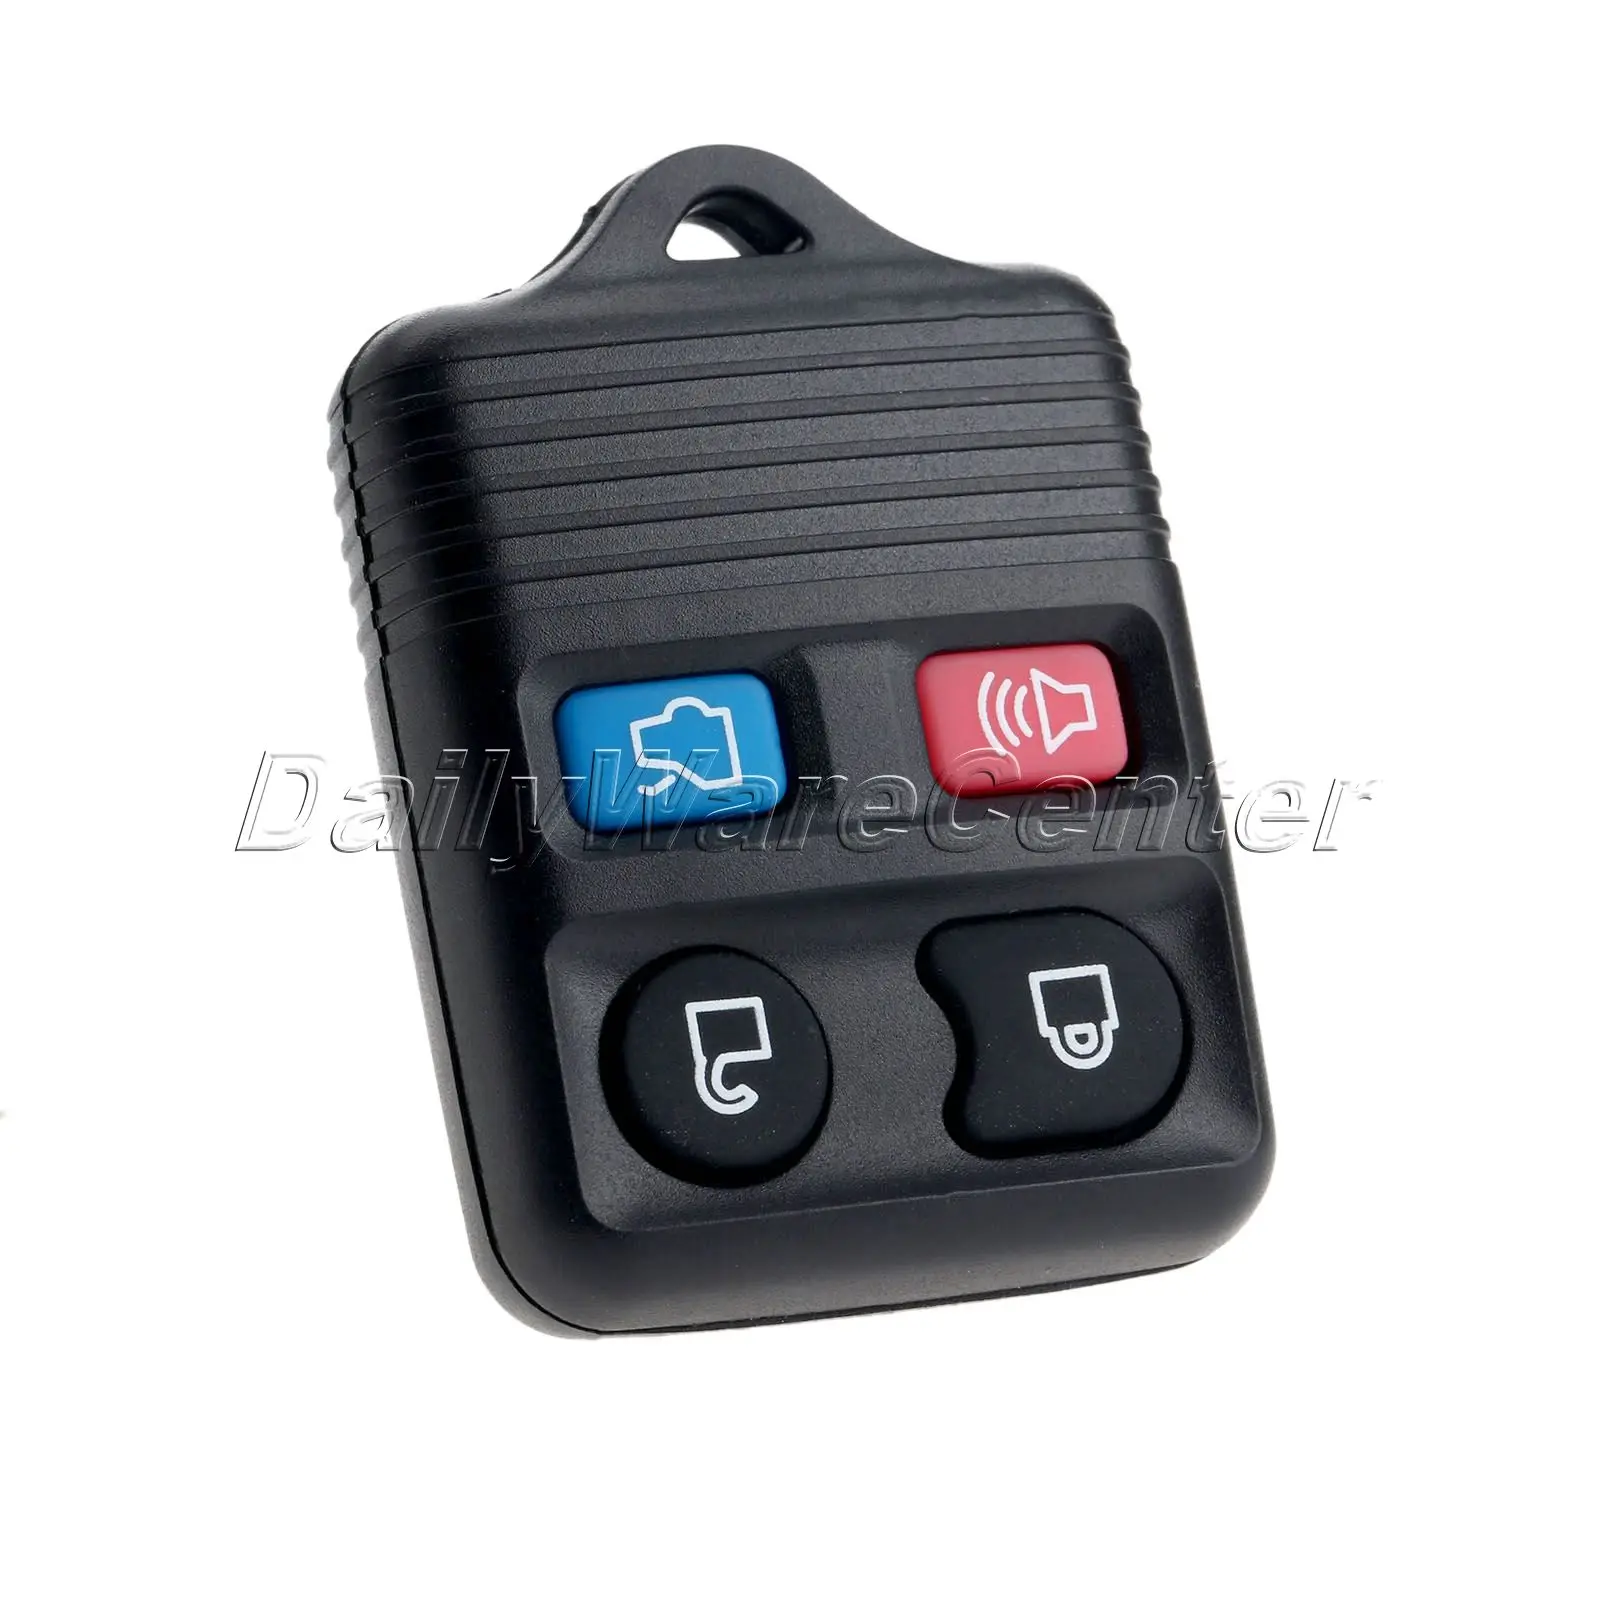 New 4 Button Keyless Entry Remote Control Car Key Shell Case Replacement Key Fob Transmitter Clicker for Ford Explorer Mercury